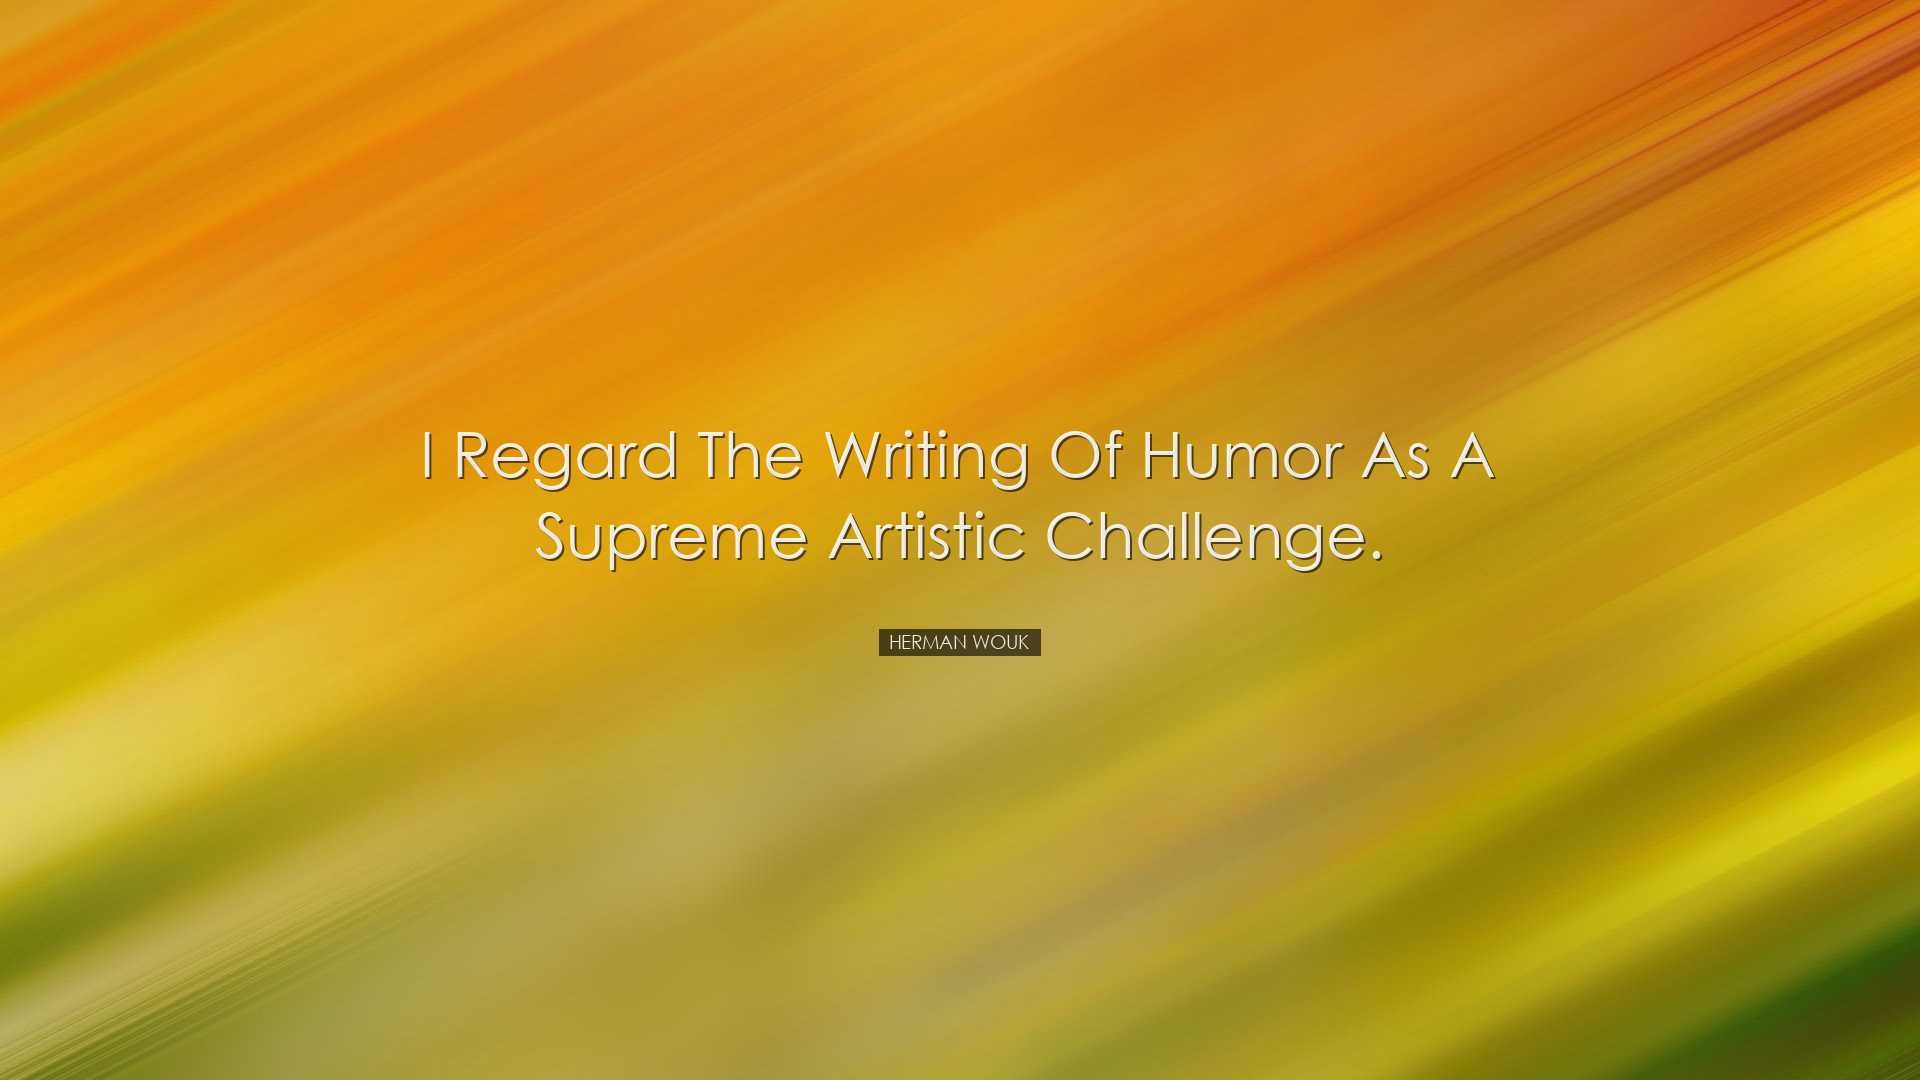 I regard the writing of humor as a supreme artistic challenge. - H